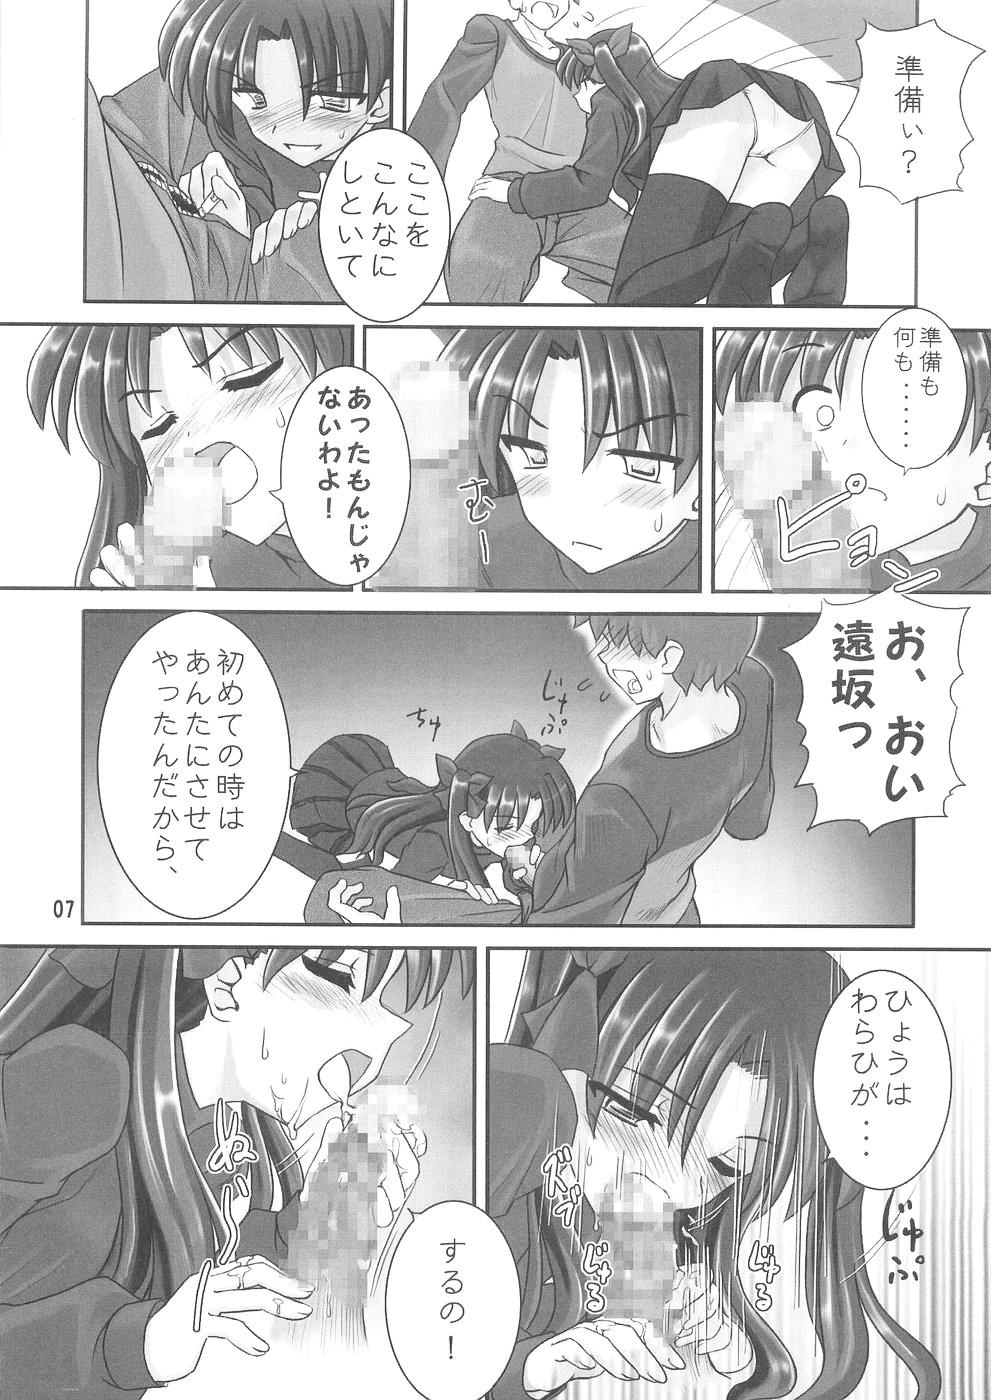 Mamando Moon Marguerite - Fate stay night Viet - Page 6